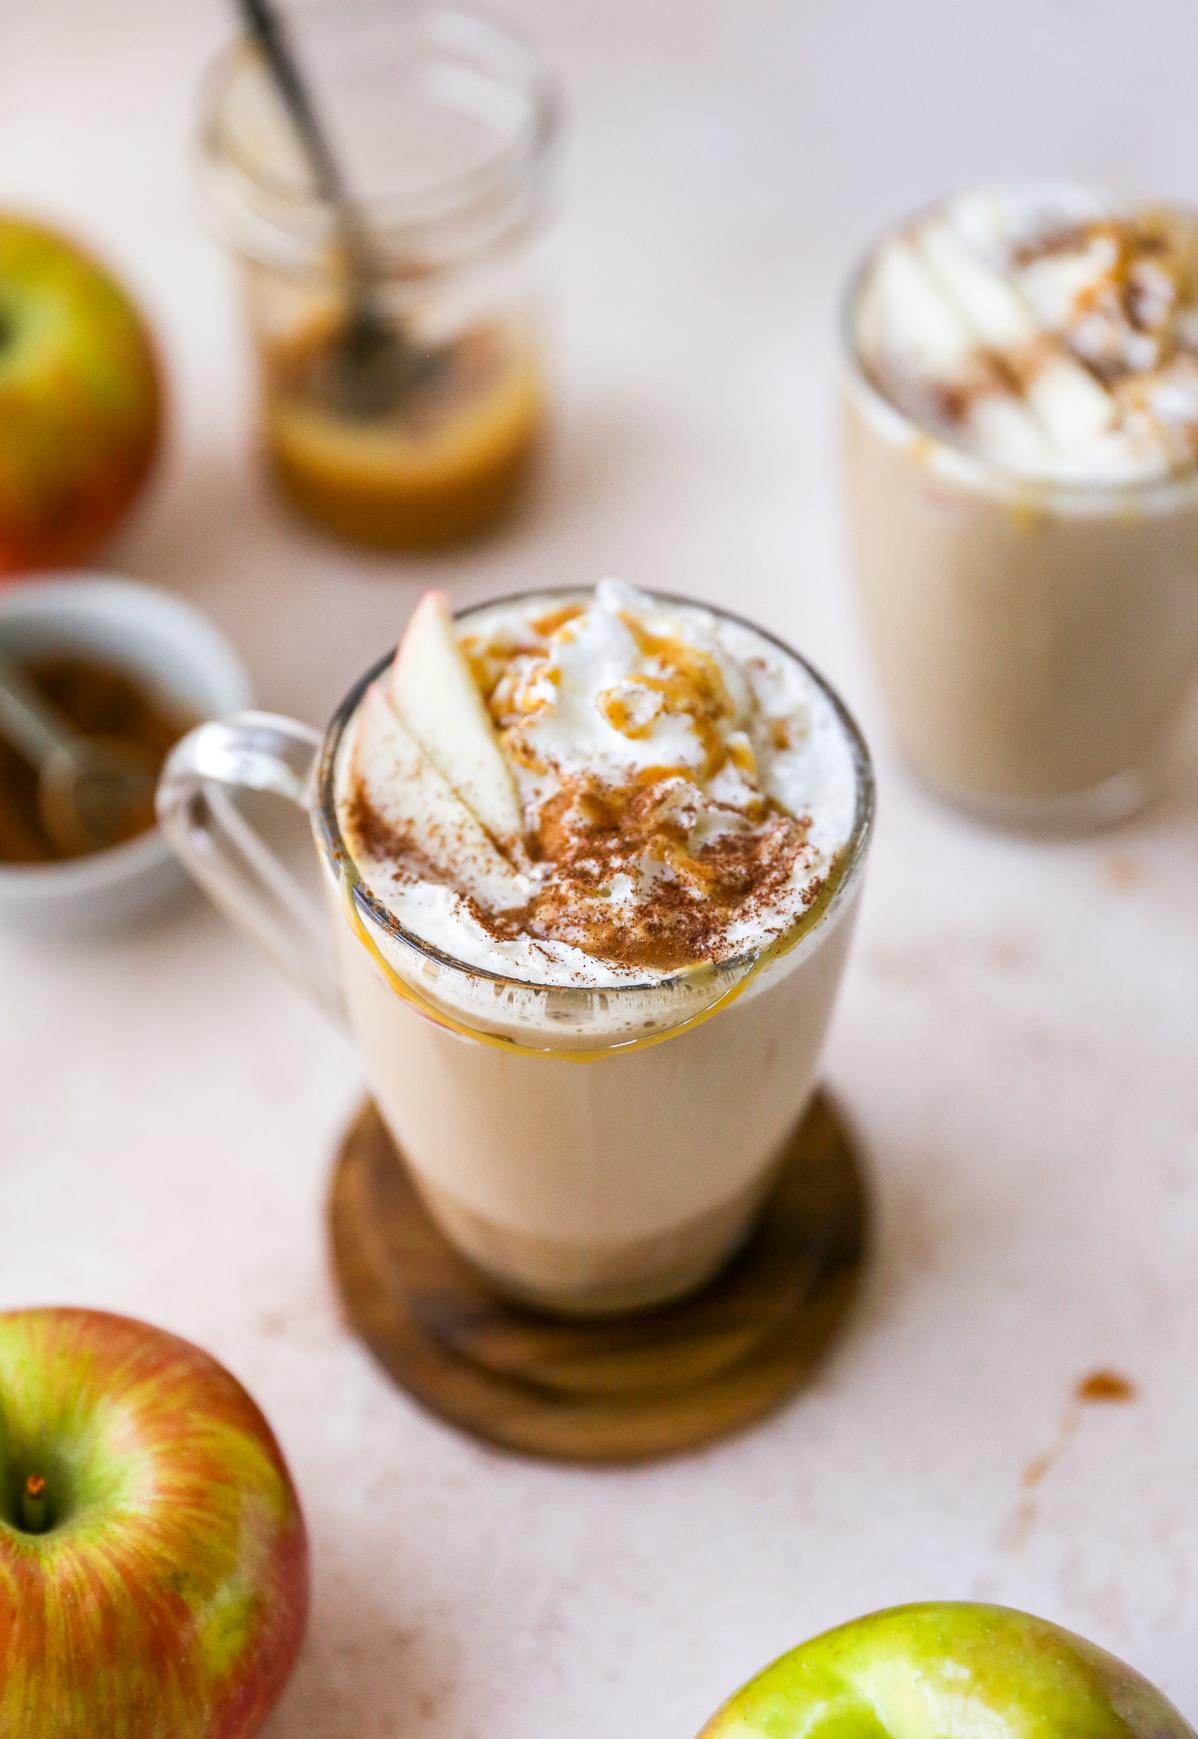  With the perfect blend of sweet and spicy, this caramel cinnamon apple latte won't disappoint👌